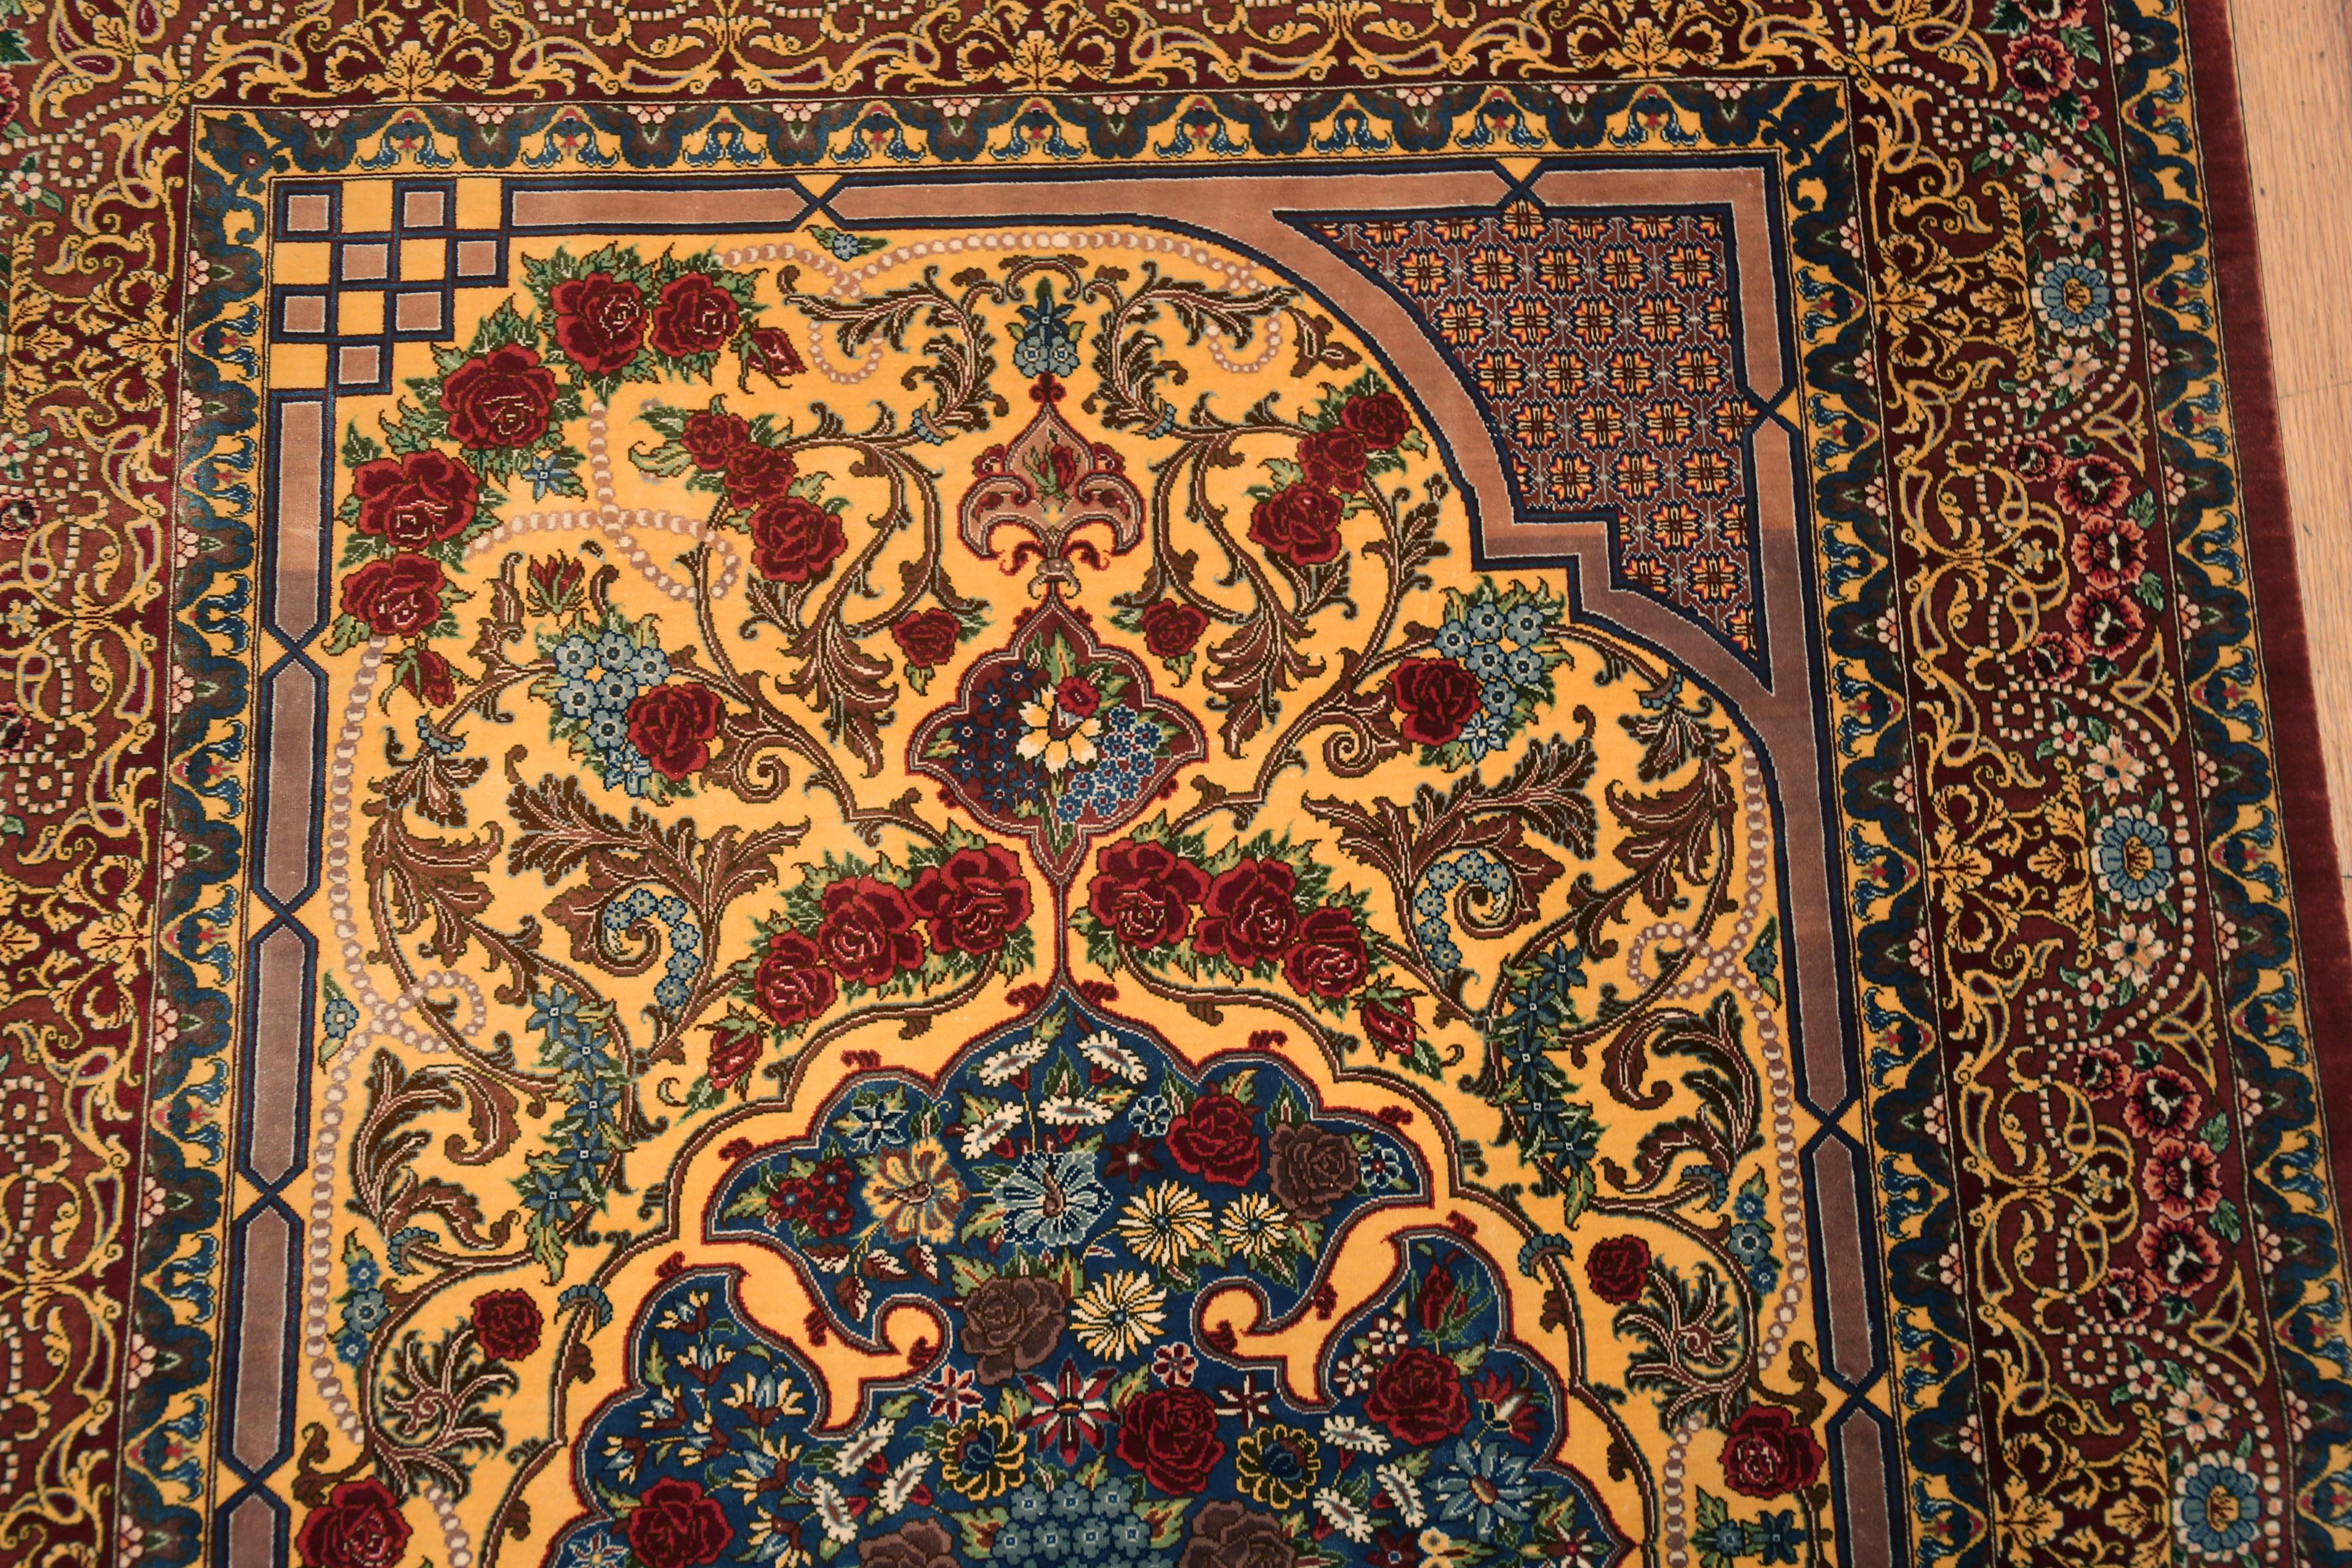 20th Century Fine Small Artistic Gold Color Luxurious Vintage Persian Silk Qum Rug 3'4